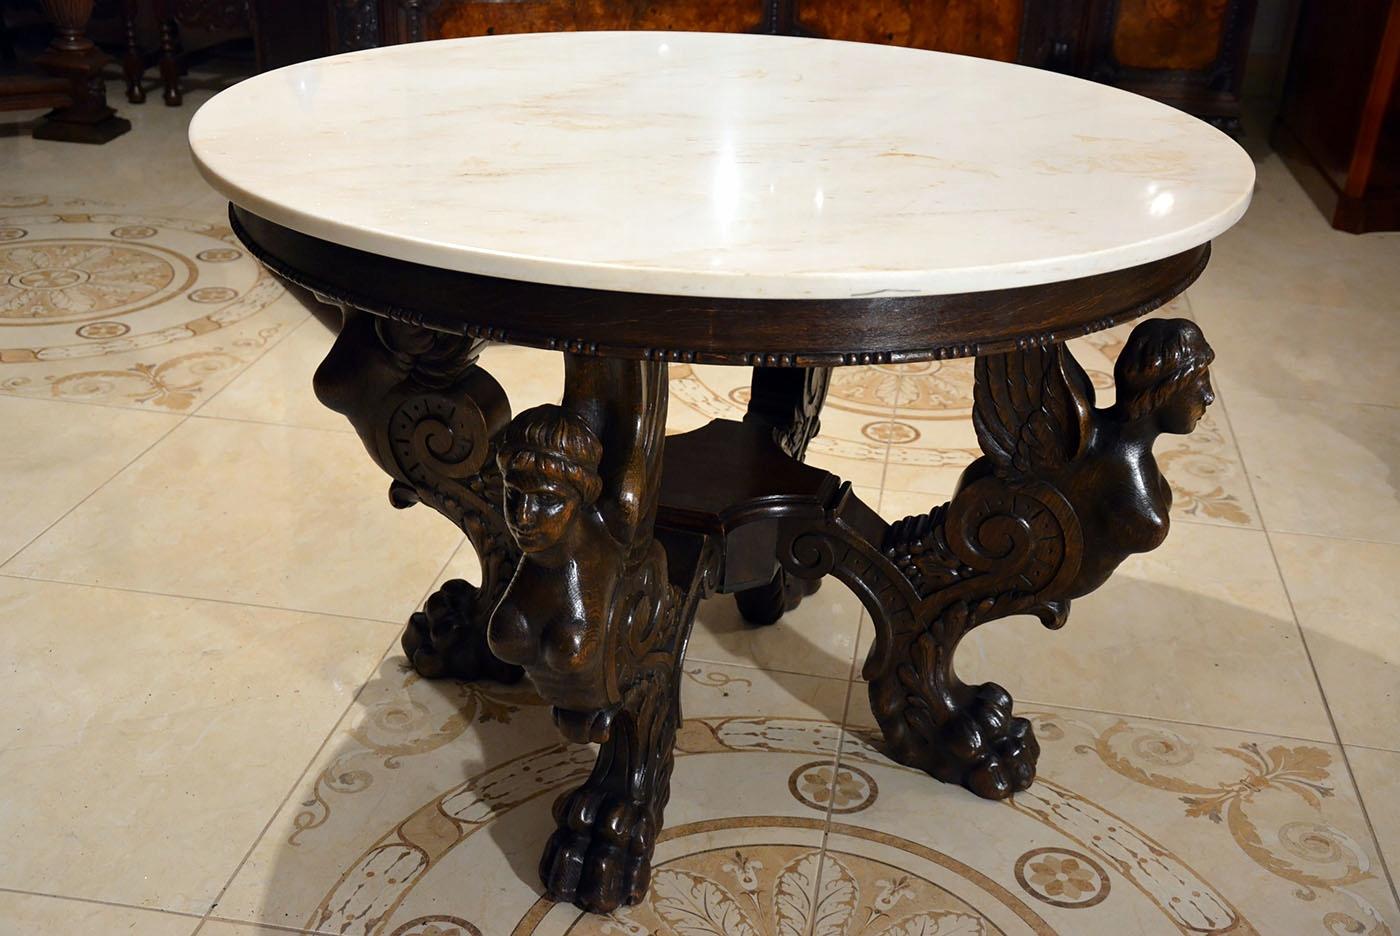 European Oak Renaissance Revival Table with Marble Top, Beginning of 20th Century